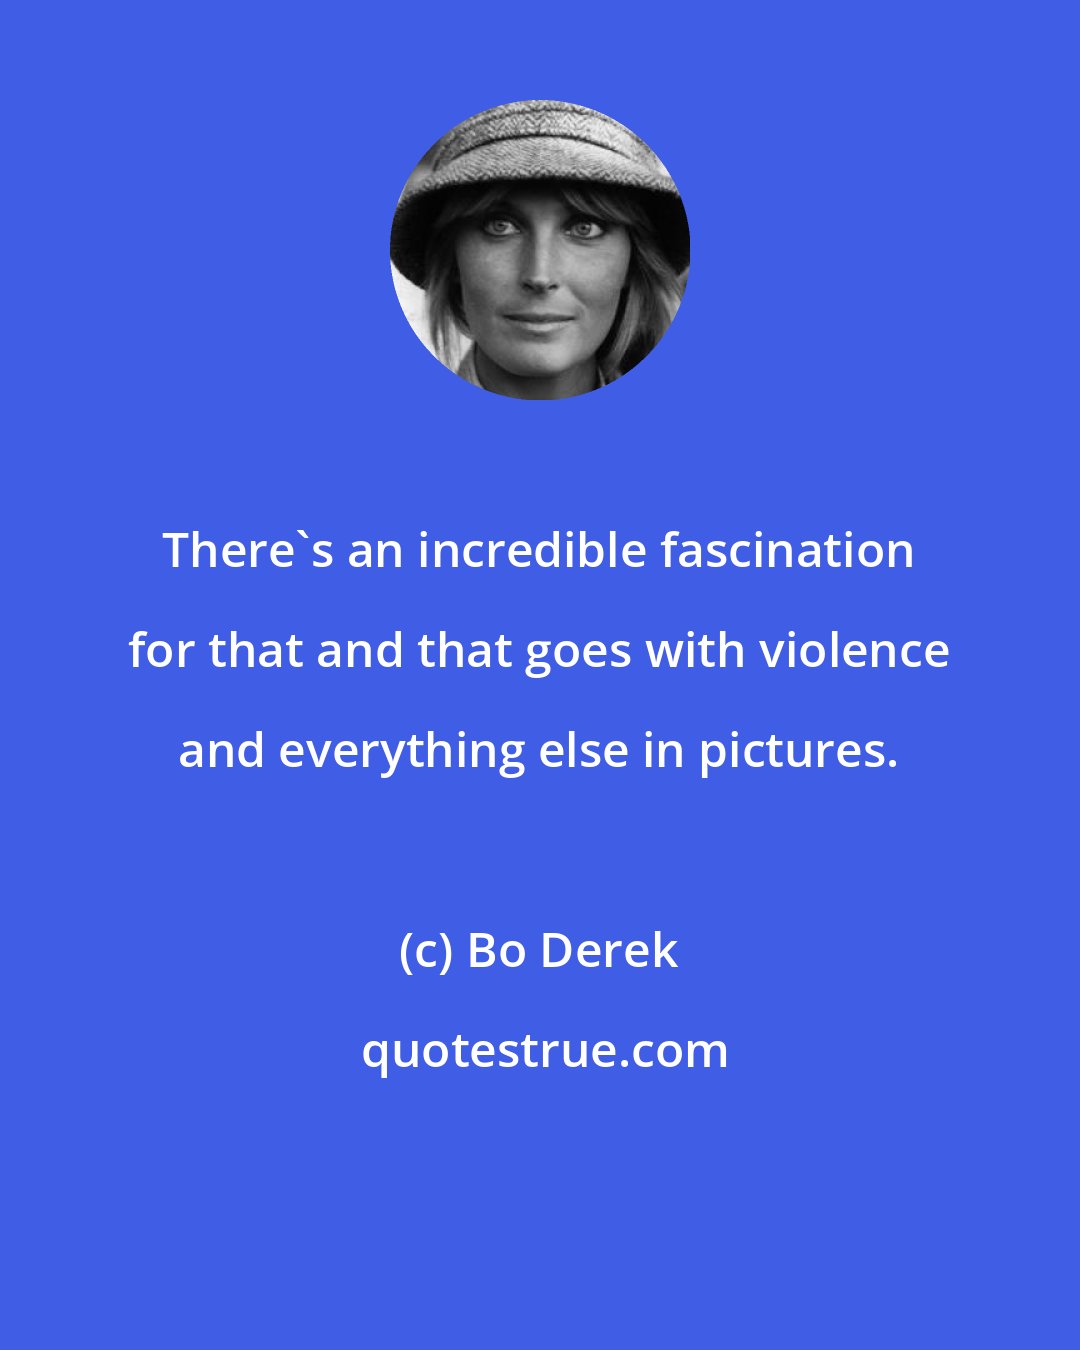 Bo Derek: There's an incredible fascination for that and that goes with violence and everything else in pictures.